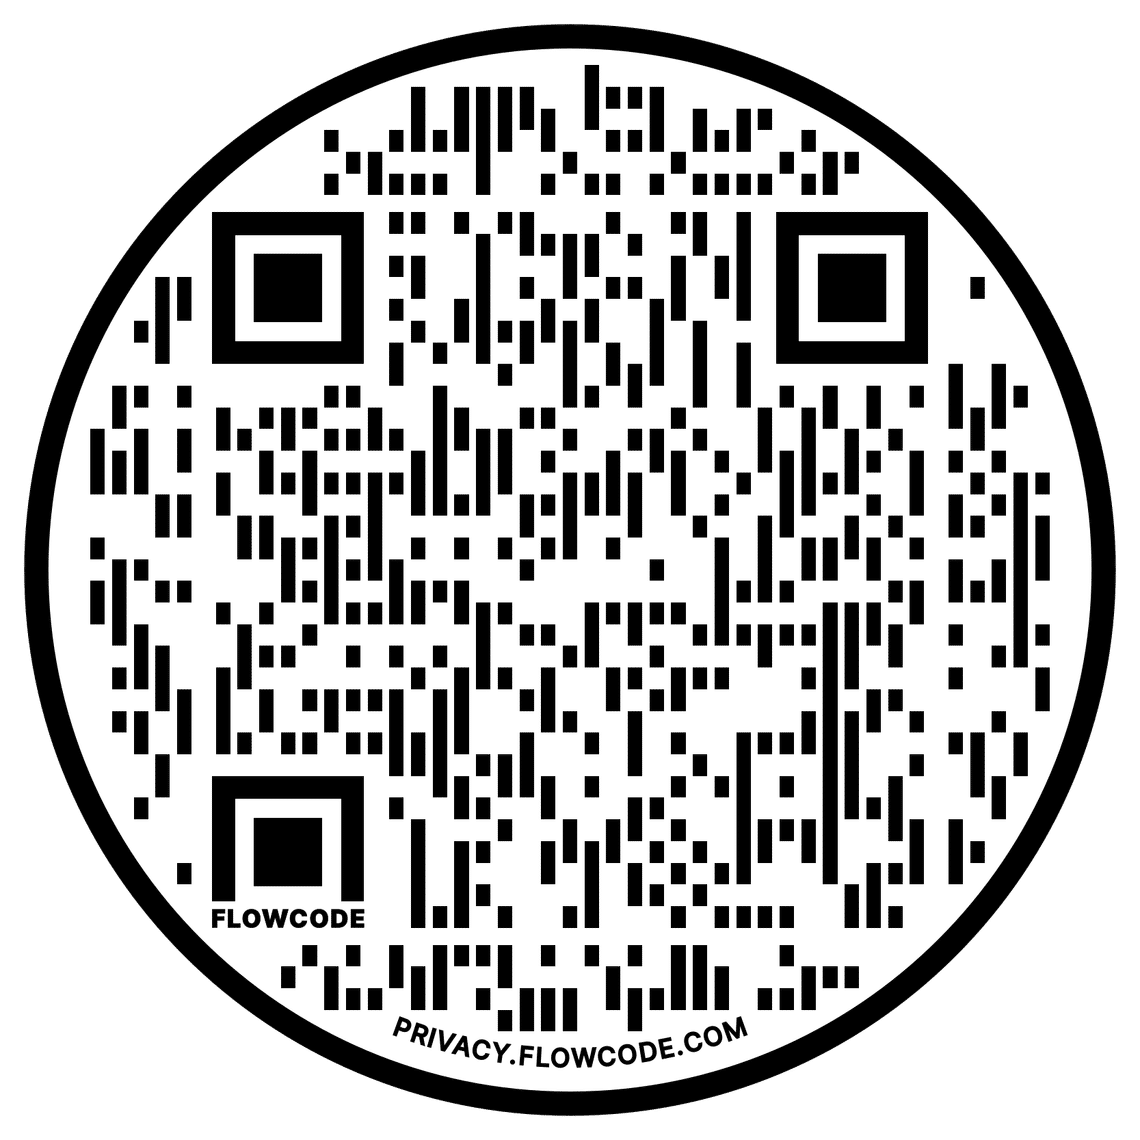 QR code to download Michelin AgroPressure app for Apple or Android